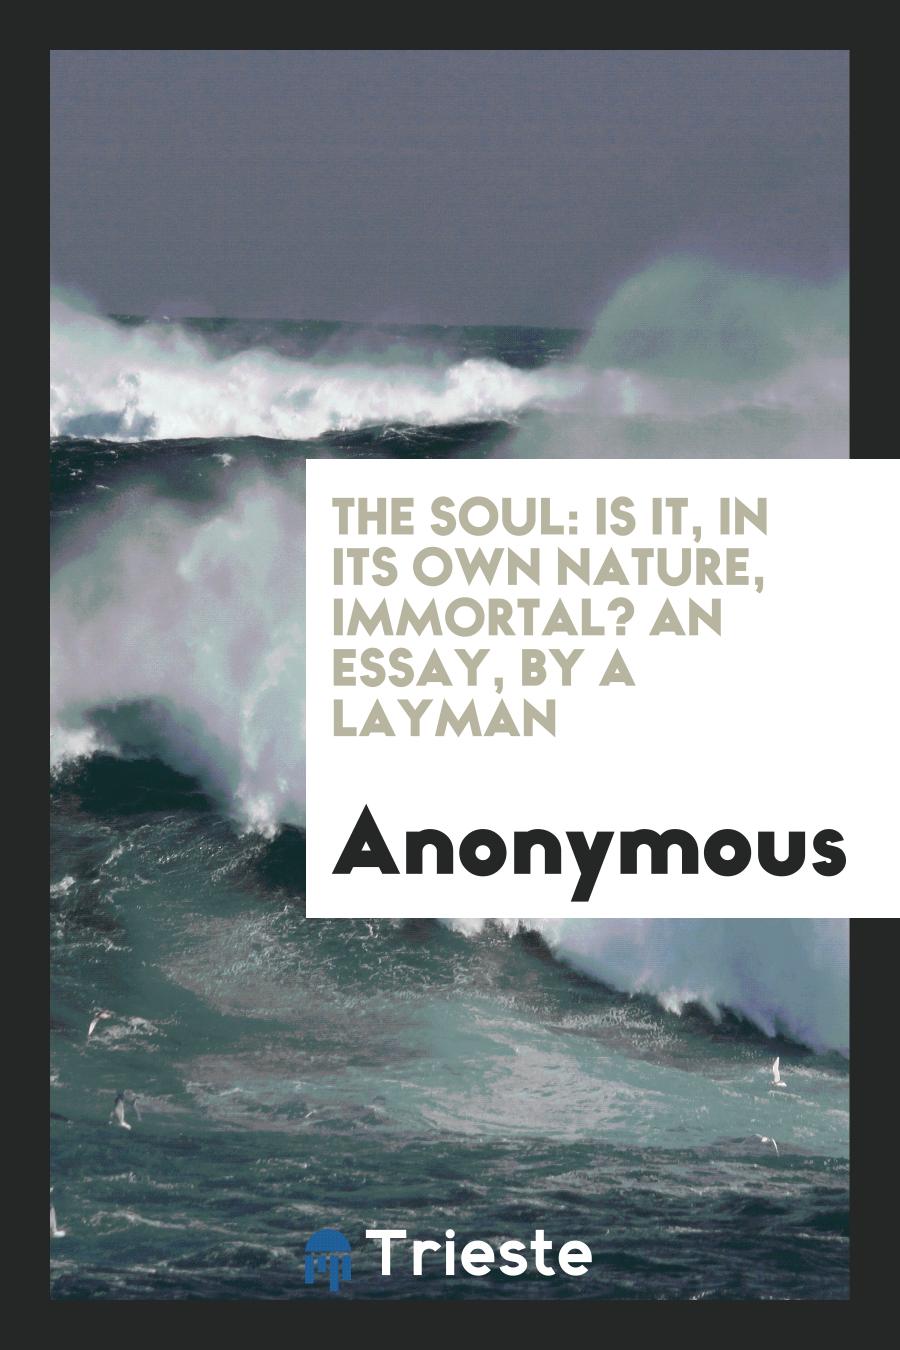 The Soul: Is It, in Its Own Nature, Immortal? An Essay, by a Layman